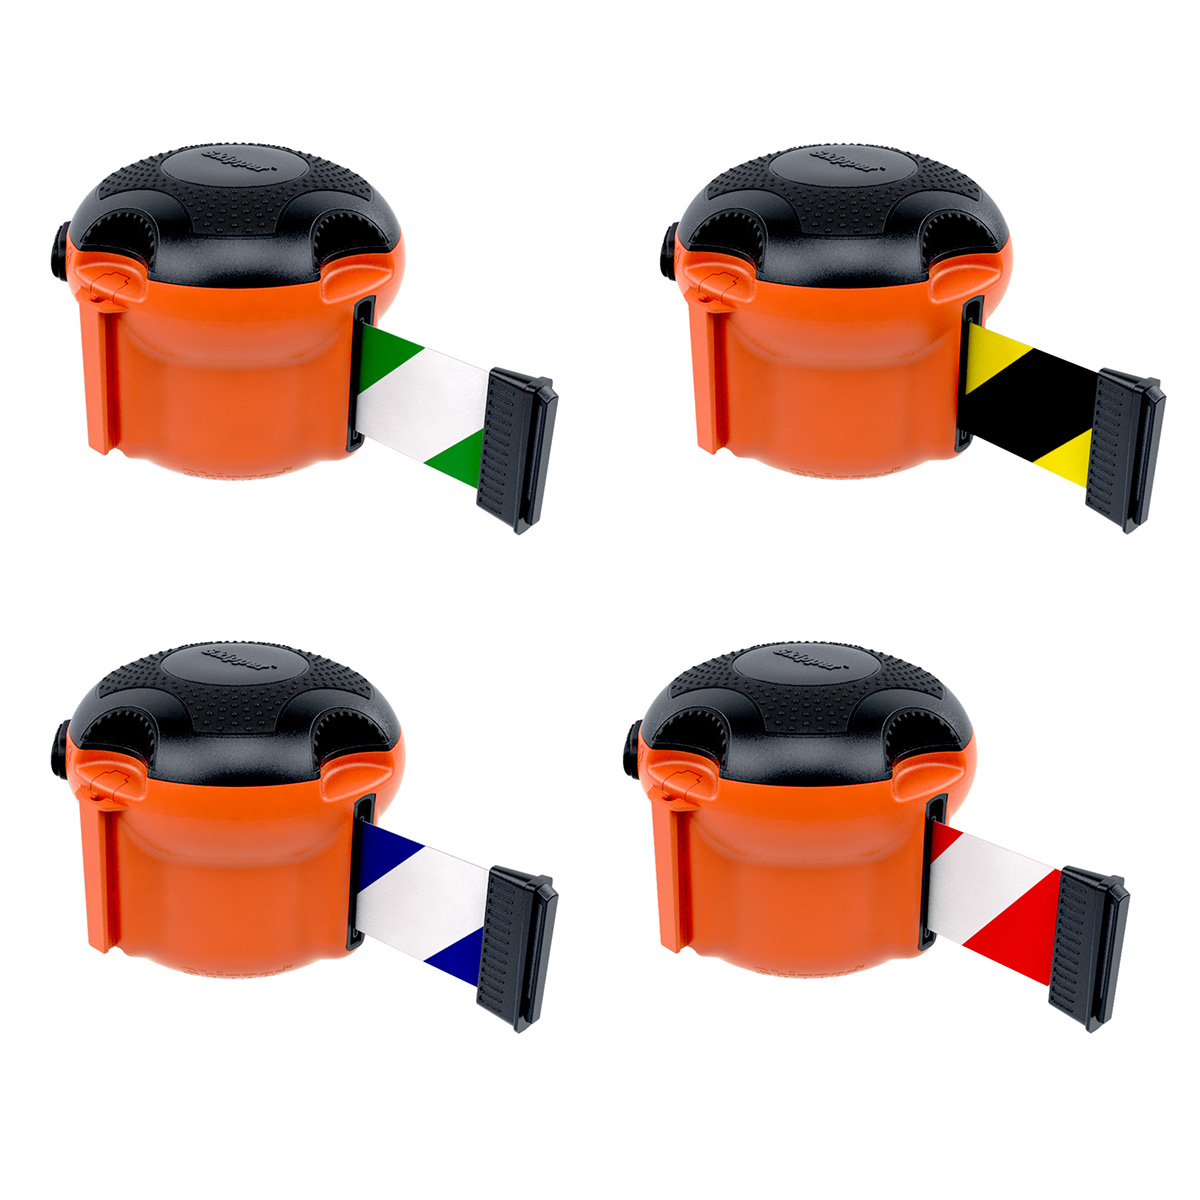 Skipper XS Retractable Safety Barrier